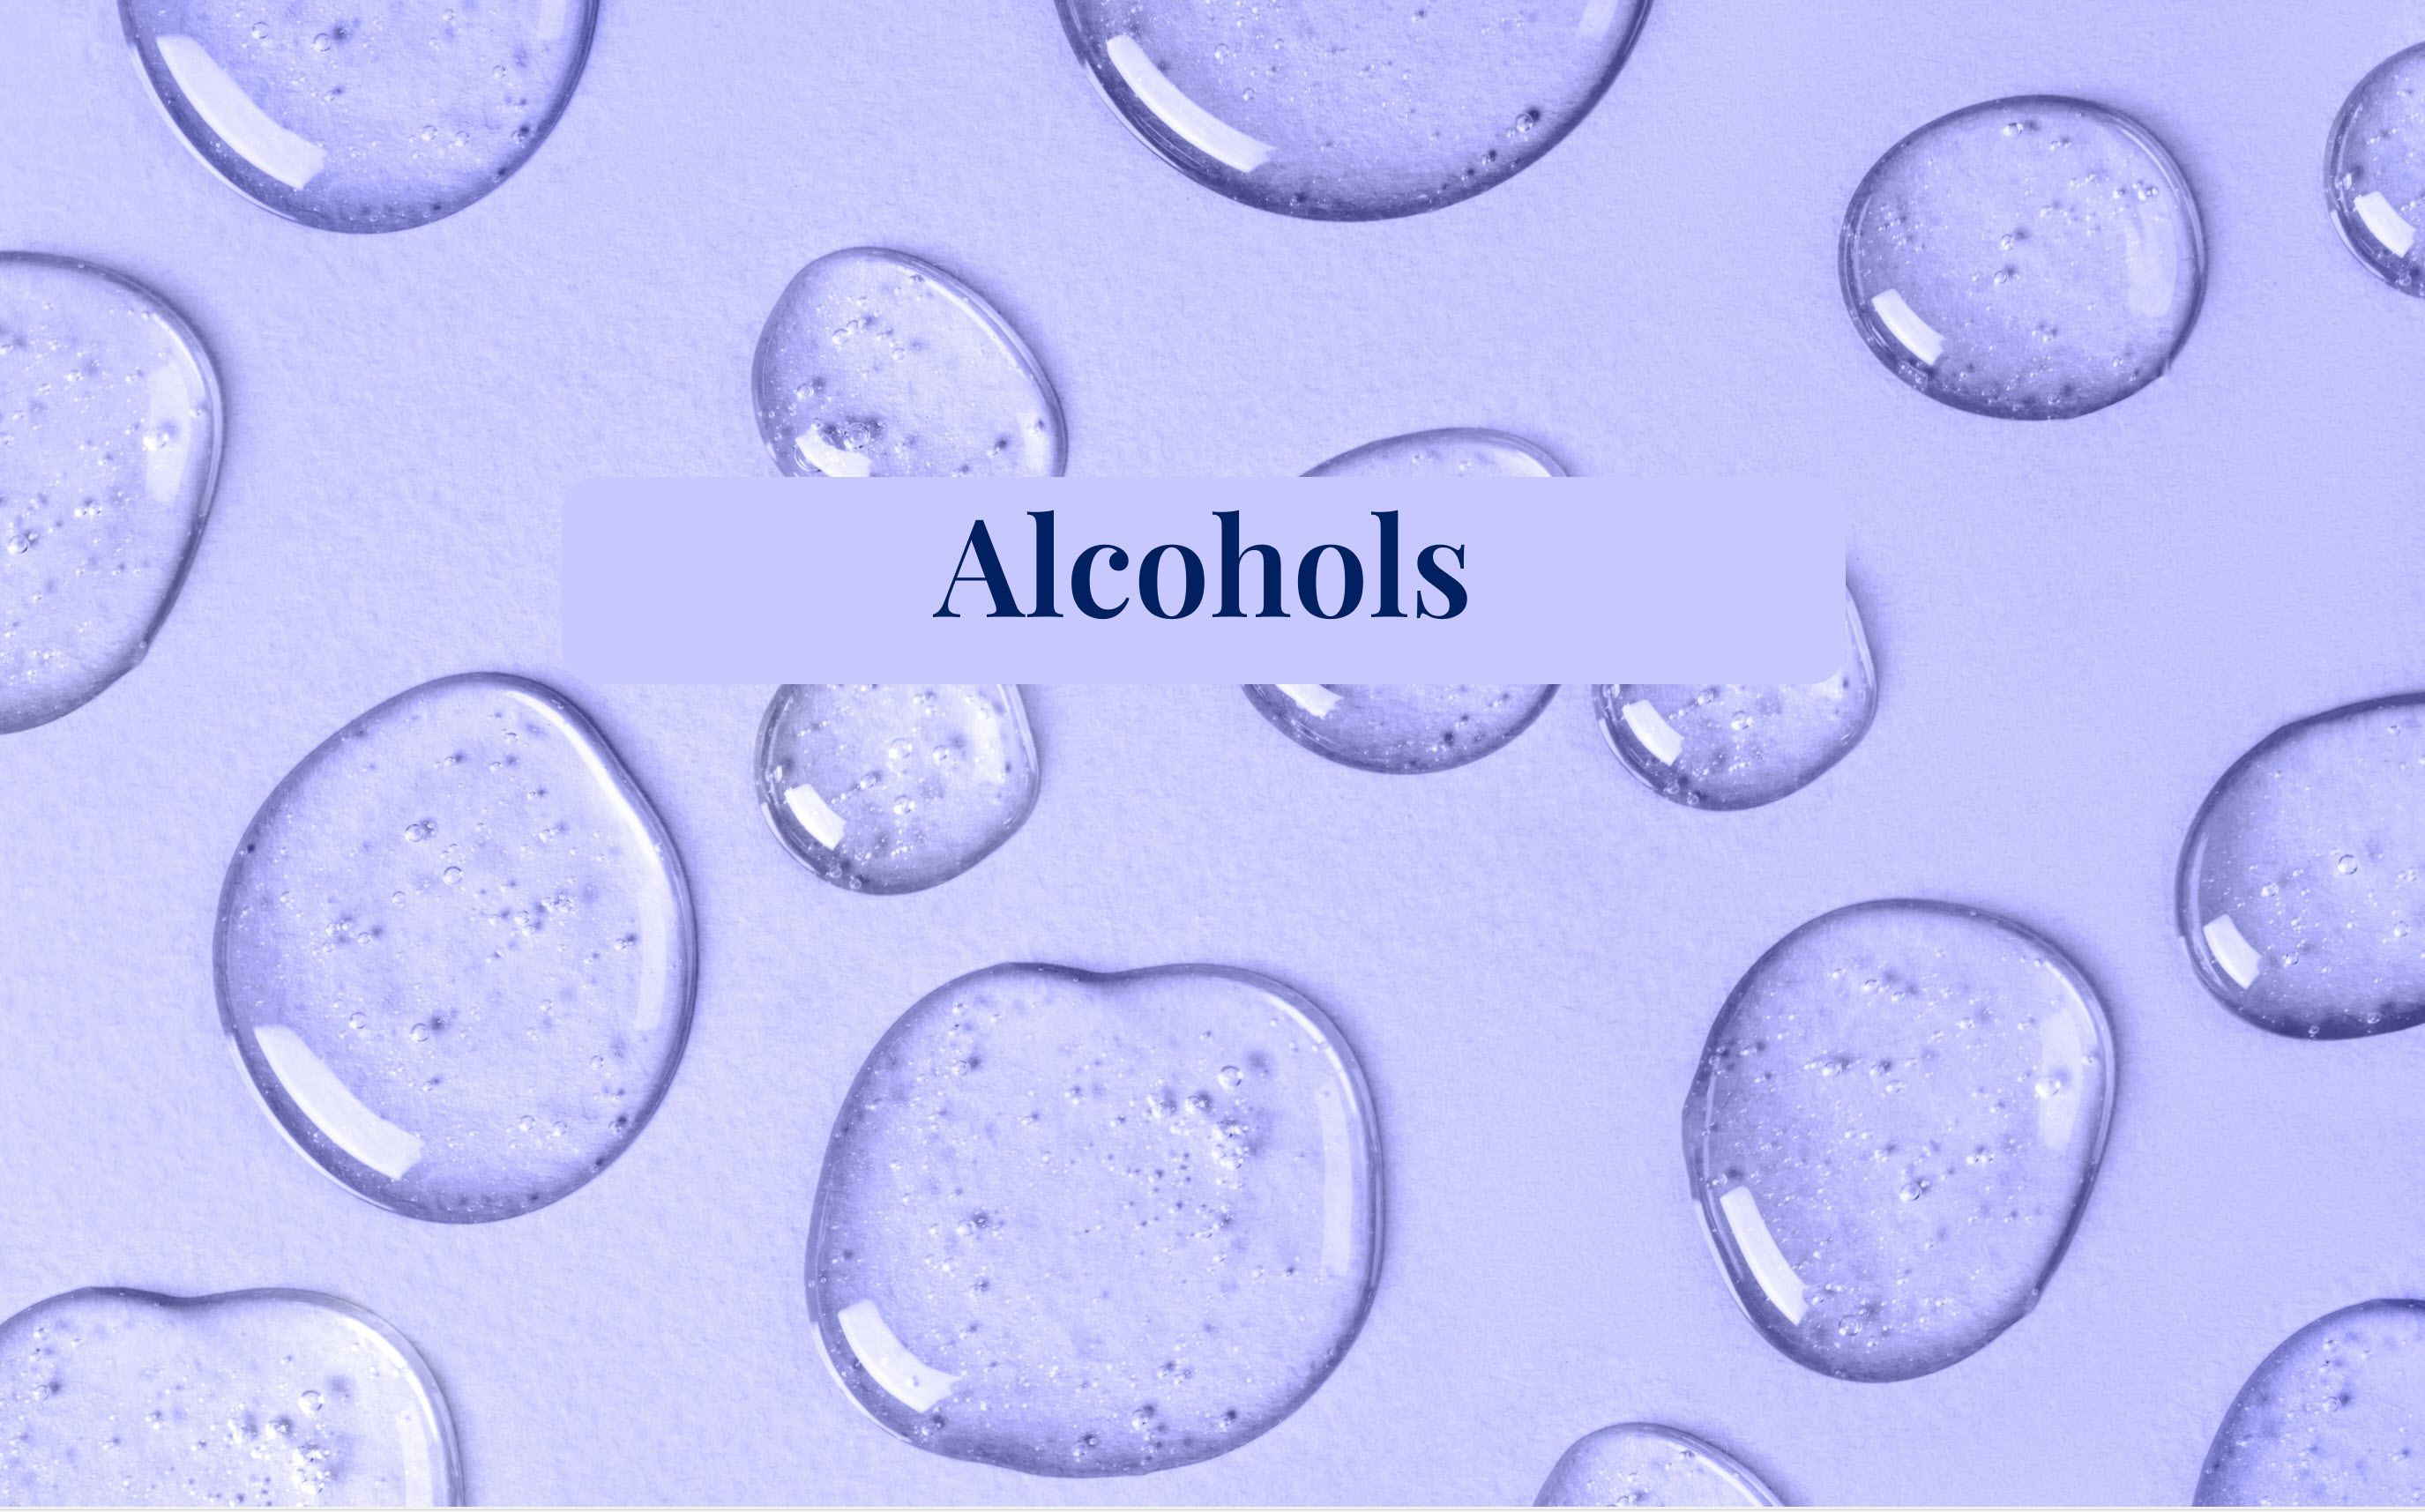 Alcohol droplets illustrating alcohol in skin care products